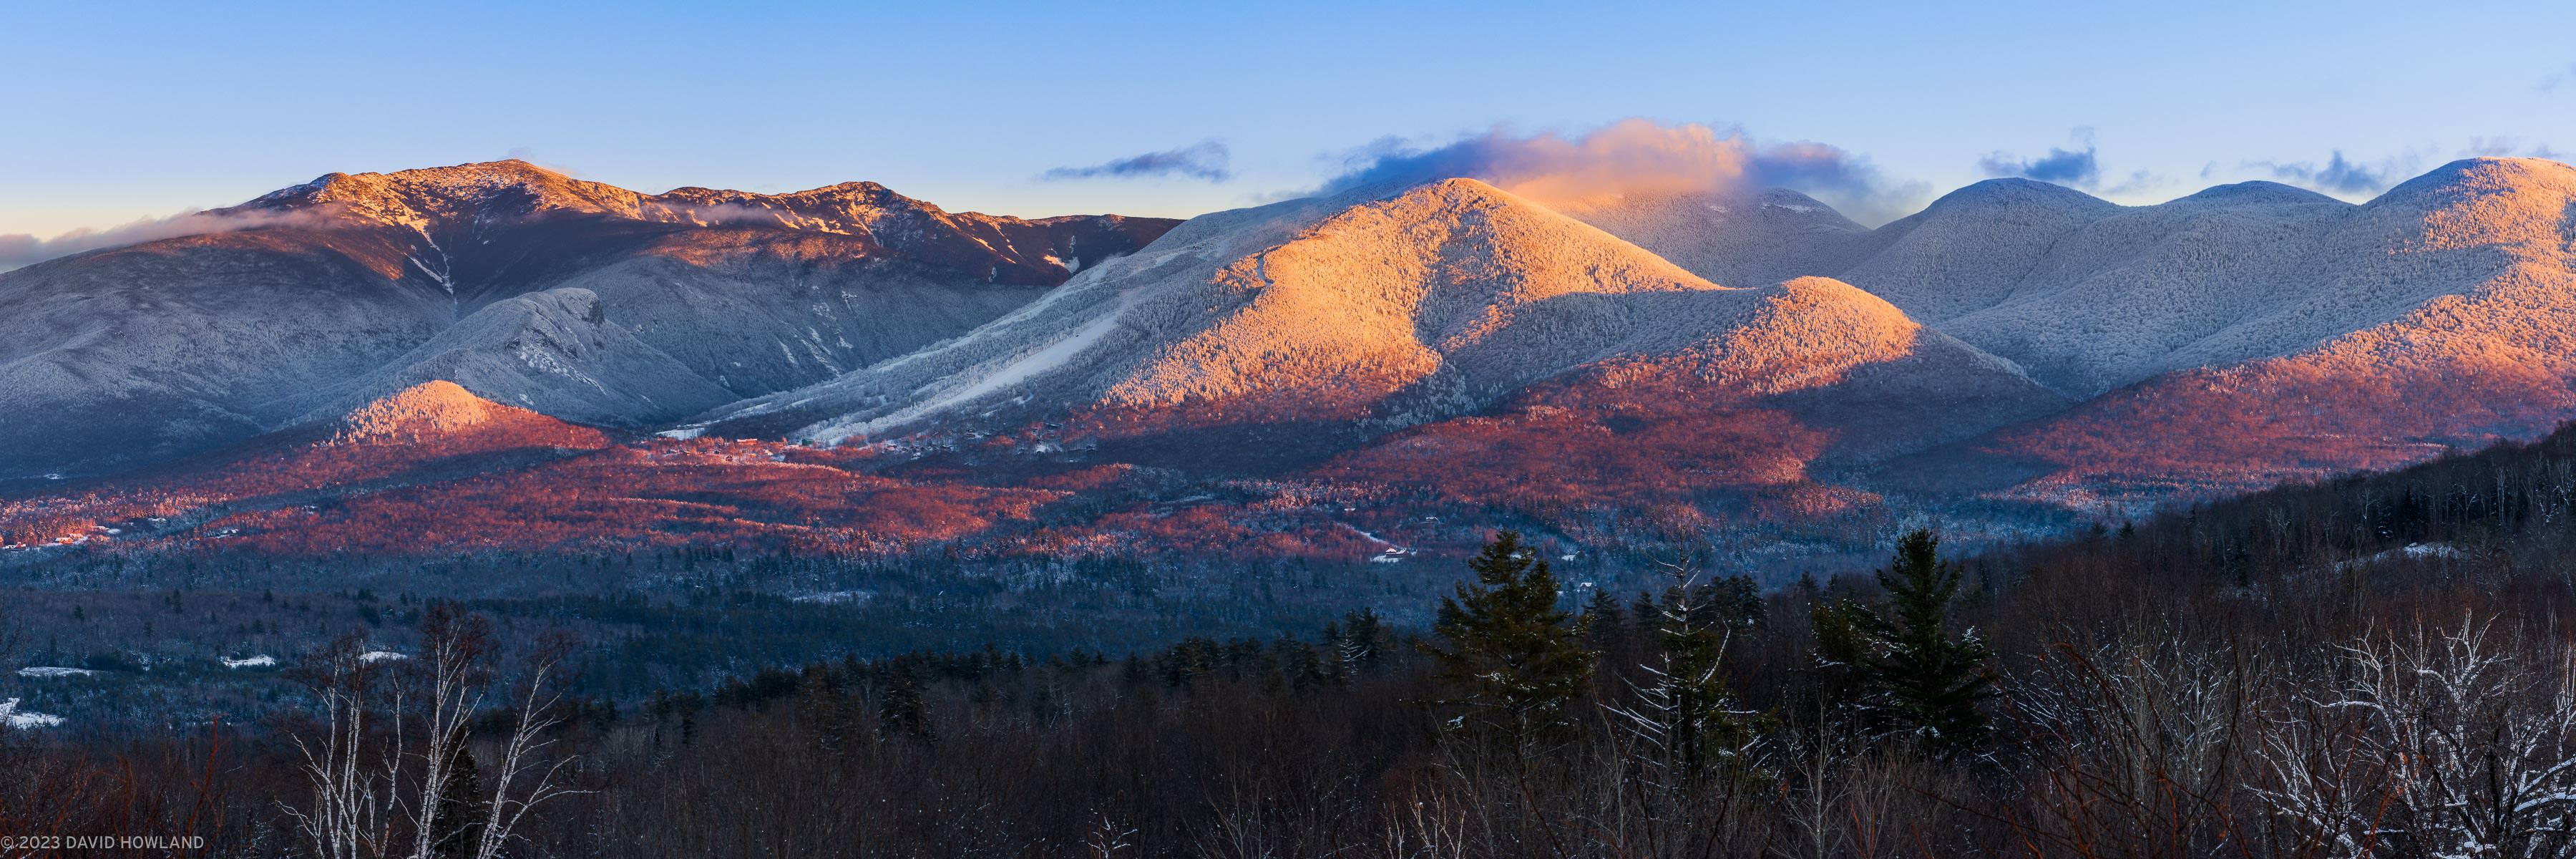 A panorama photo of alpenglow on the snow covered peaks of Franconia Notch in the White Mountains of New Hampshire.